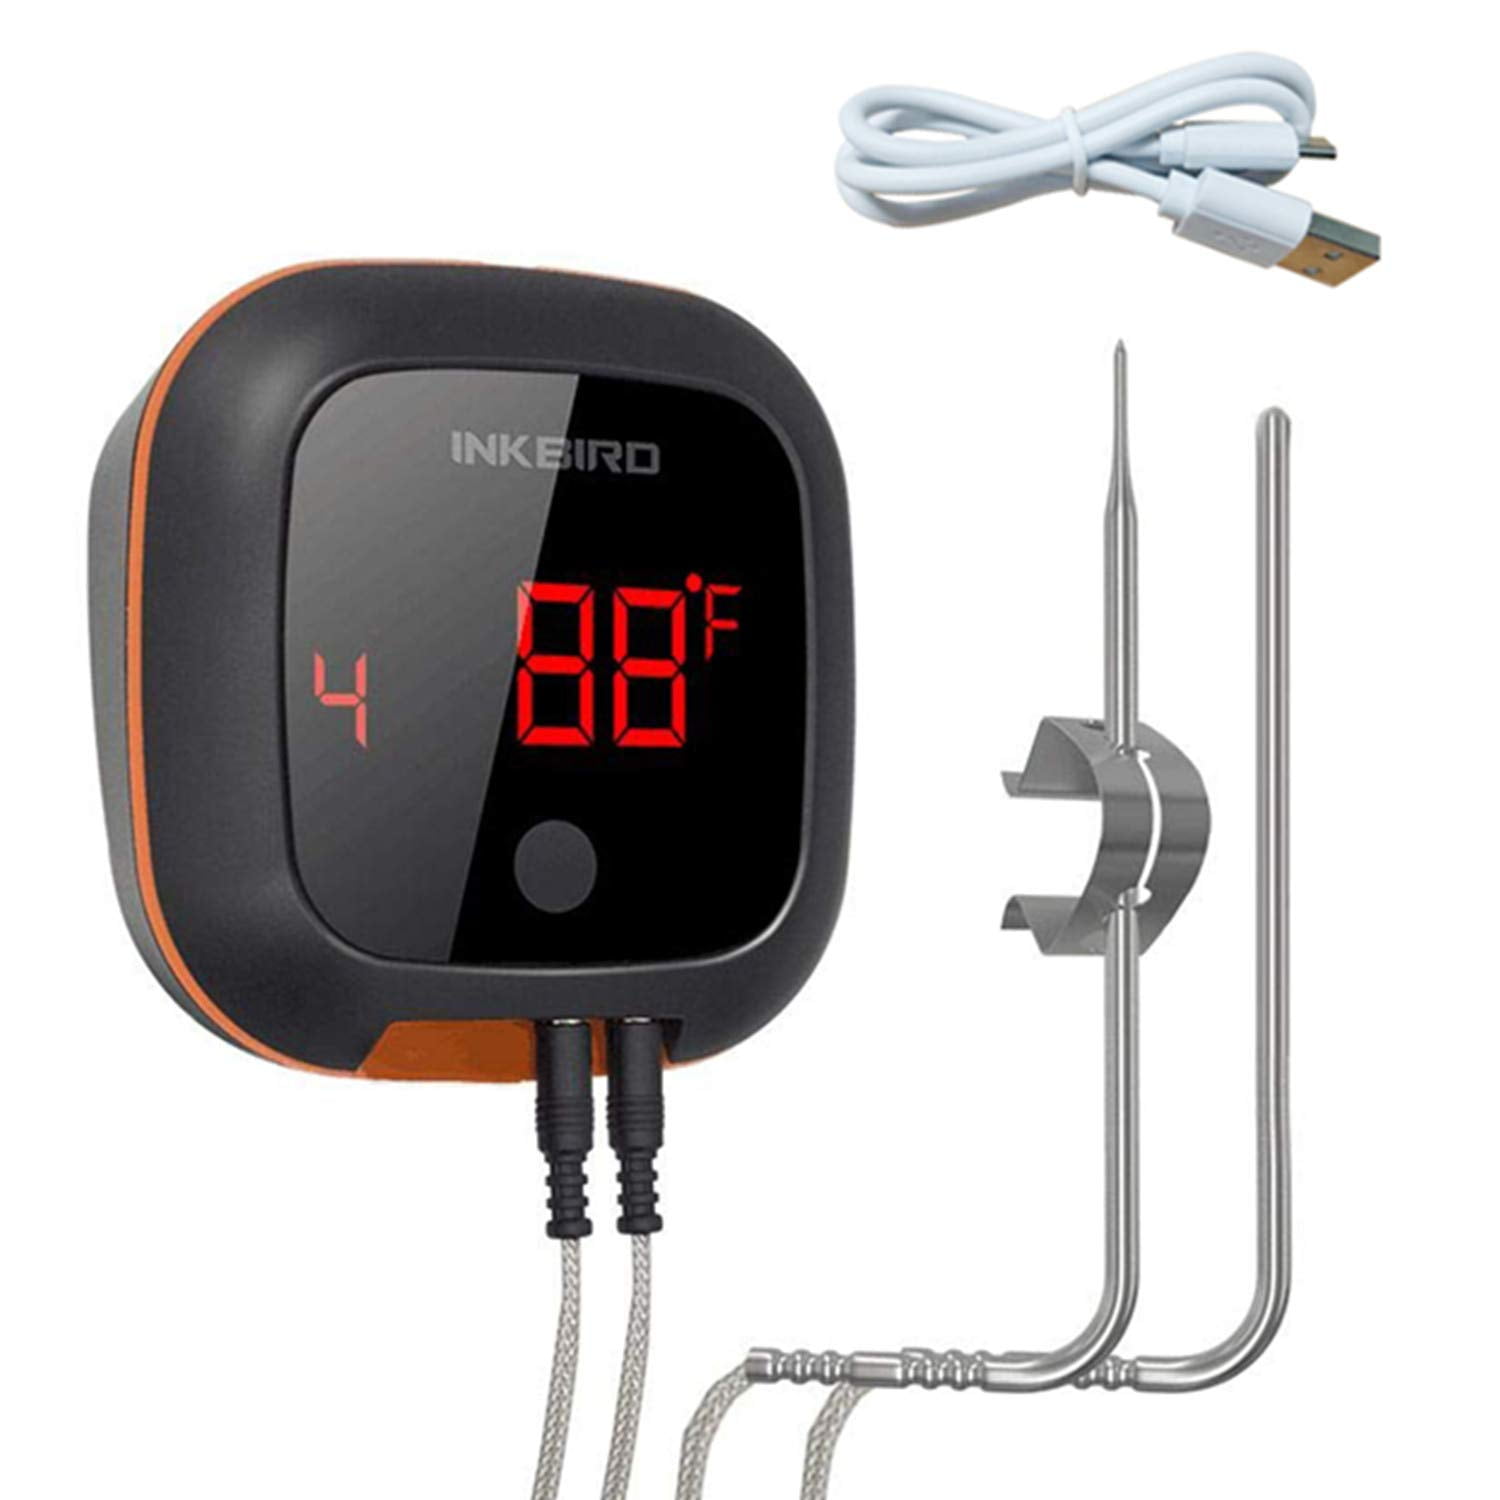 Bluetooth BBQ Meat Thermometer Grill Barbecue Temperature Gauge Inkbird  IBT-2X 714485014048